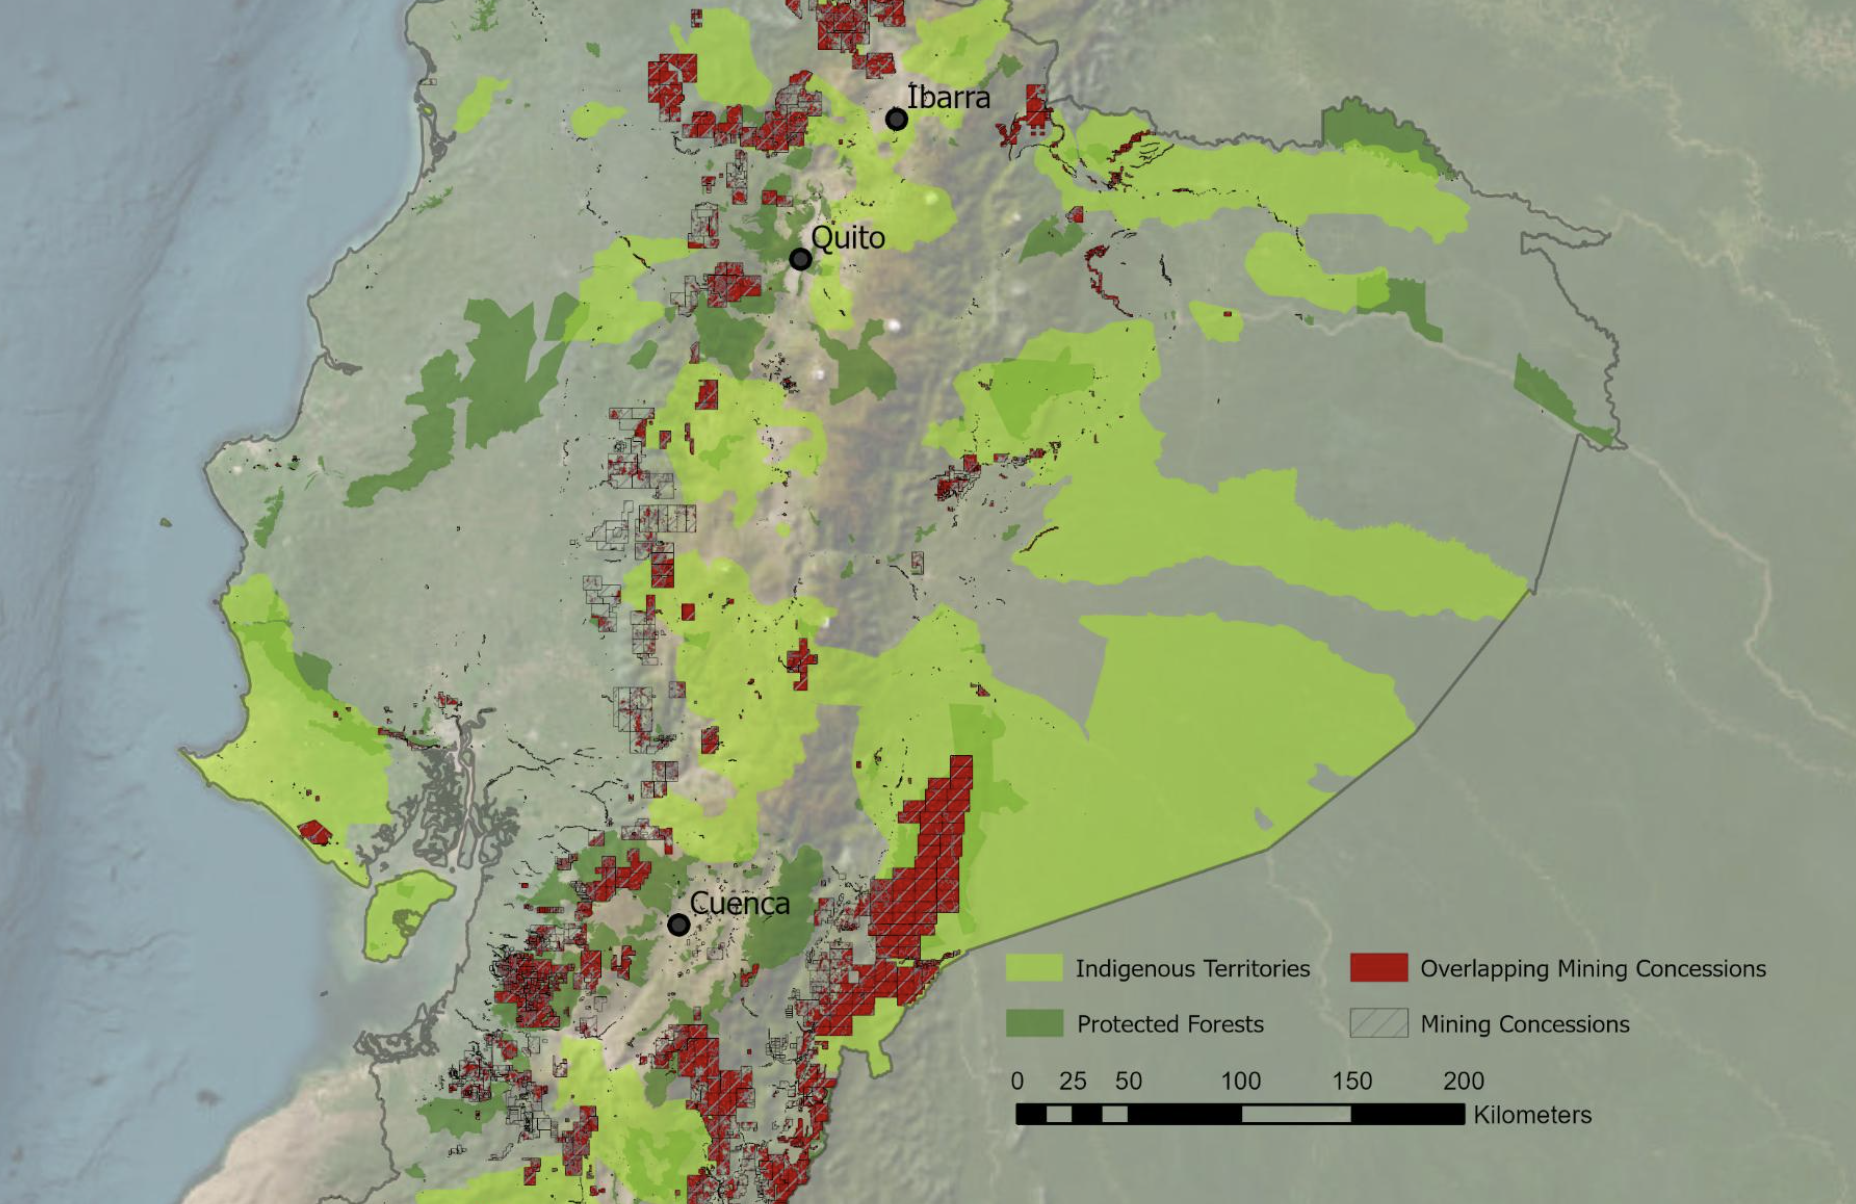 Huge areas of Ecuadorian land should be protected from mining under Rights of Nature, finds Sussex research